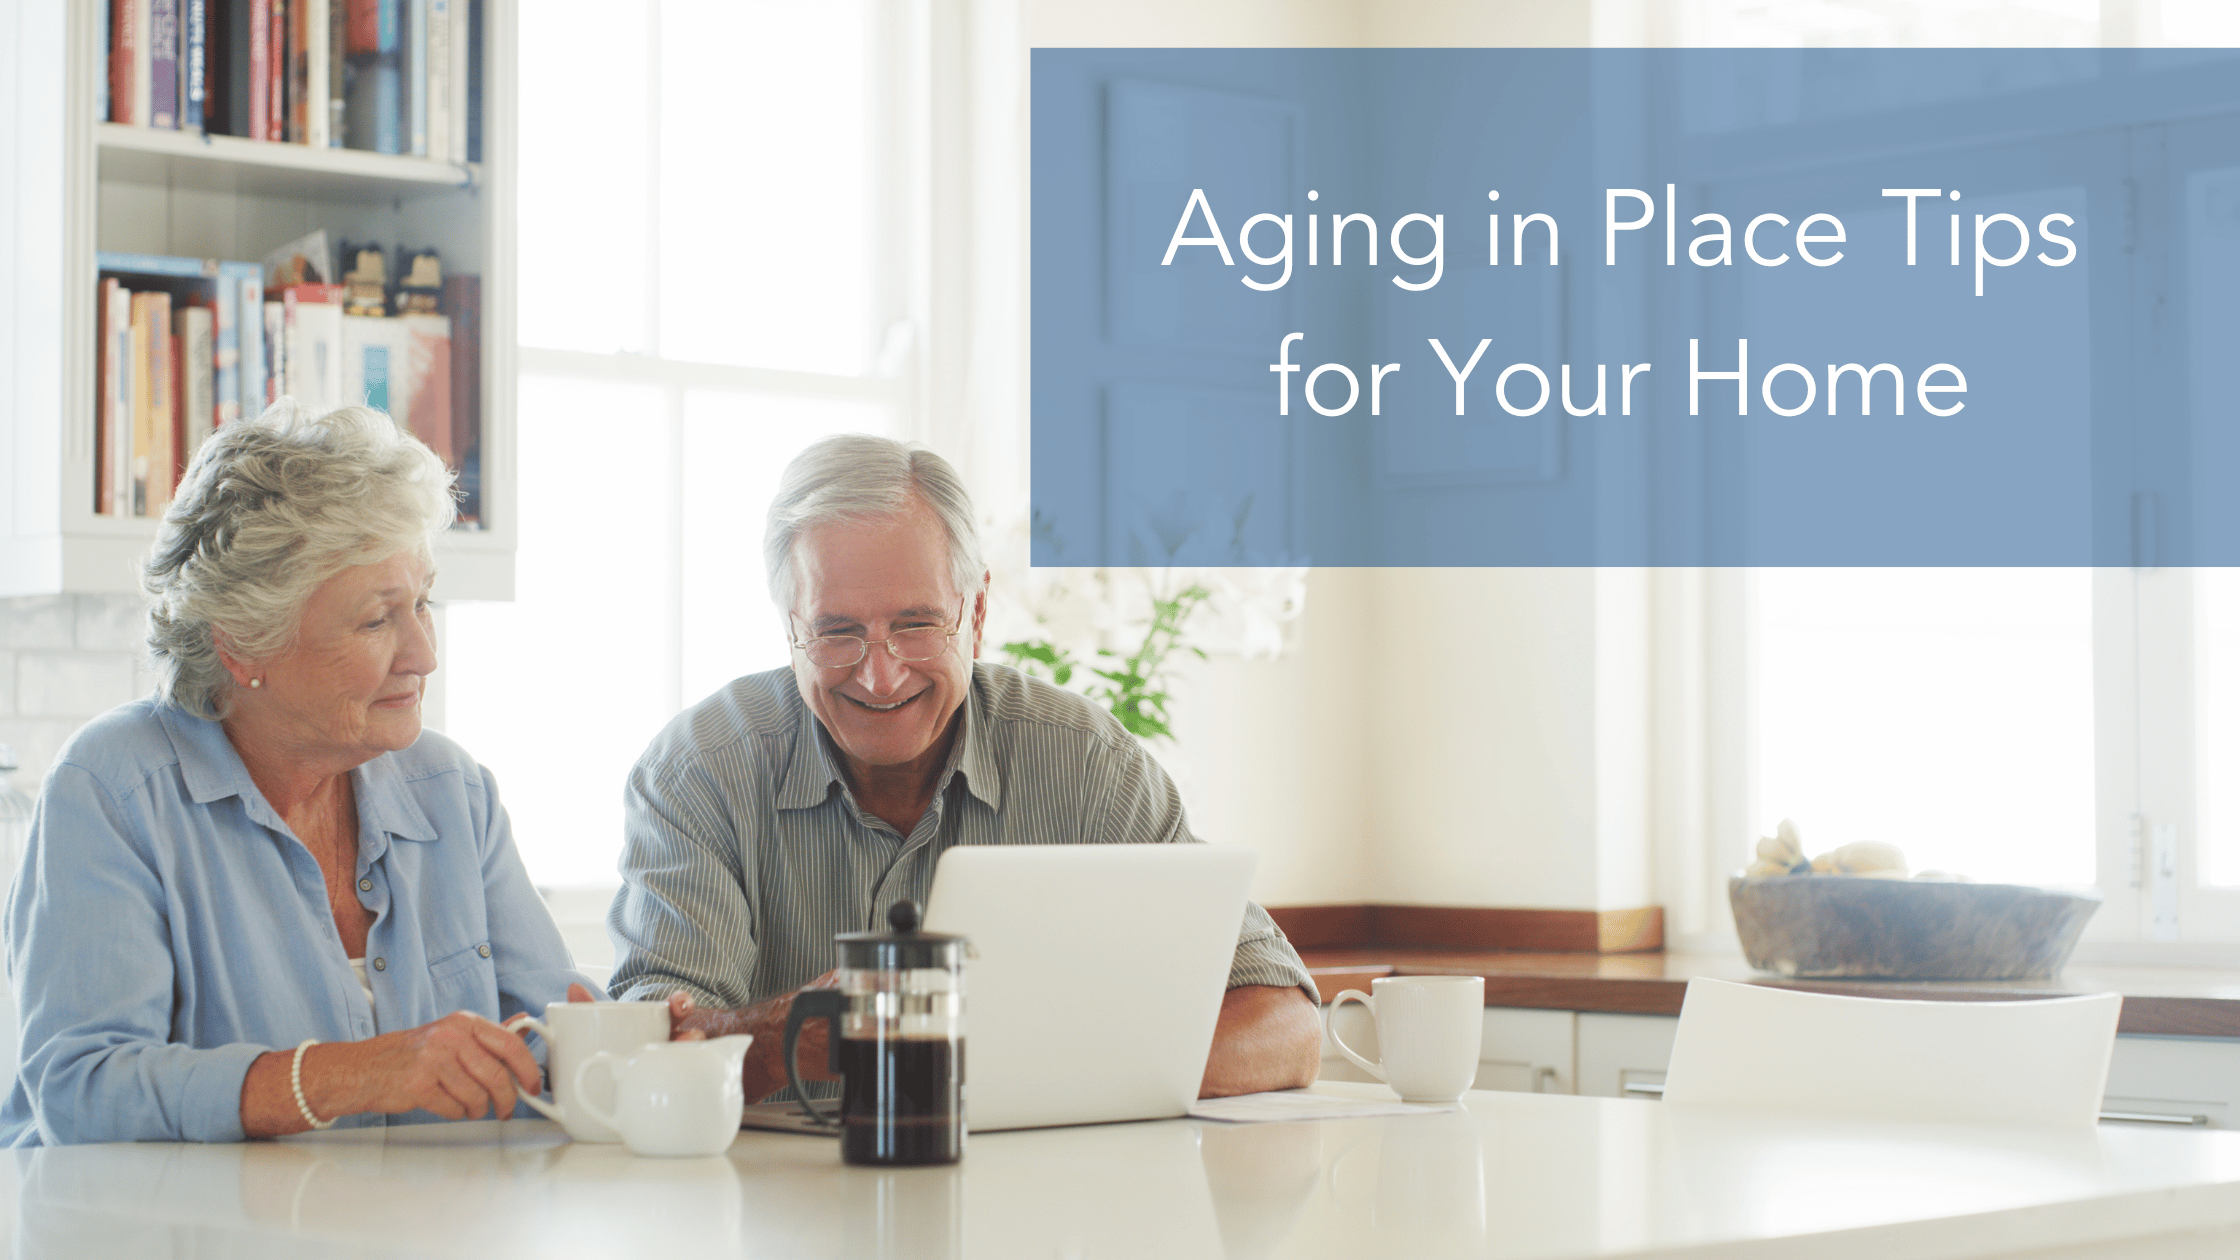 Aging in Place Tips for Your Home